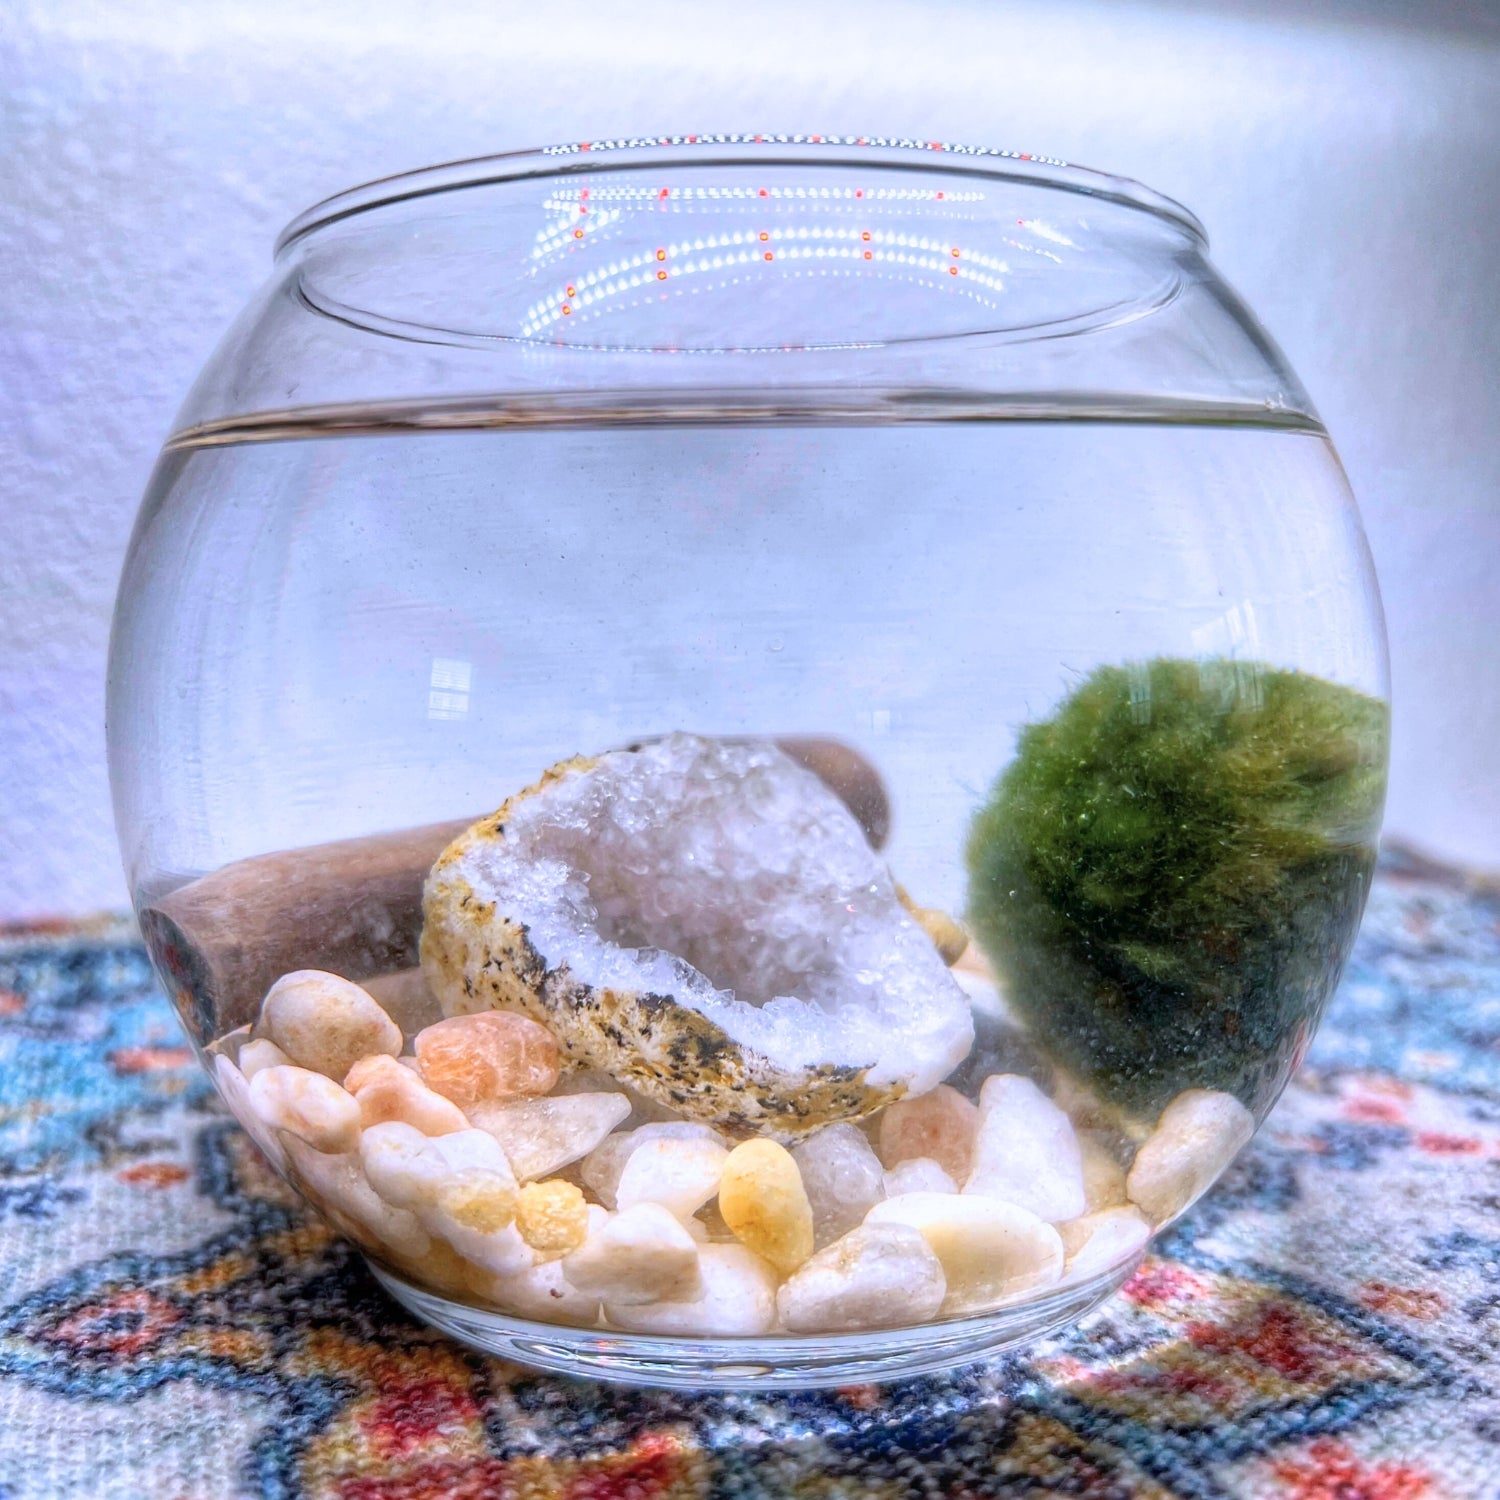 The Ultimate Marimo Moss Ball Aquarium Kit: A Unique and Eco-Friendly Gift